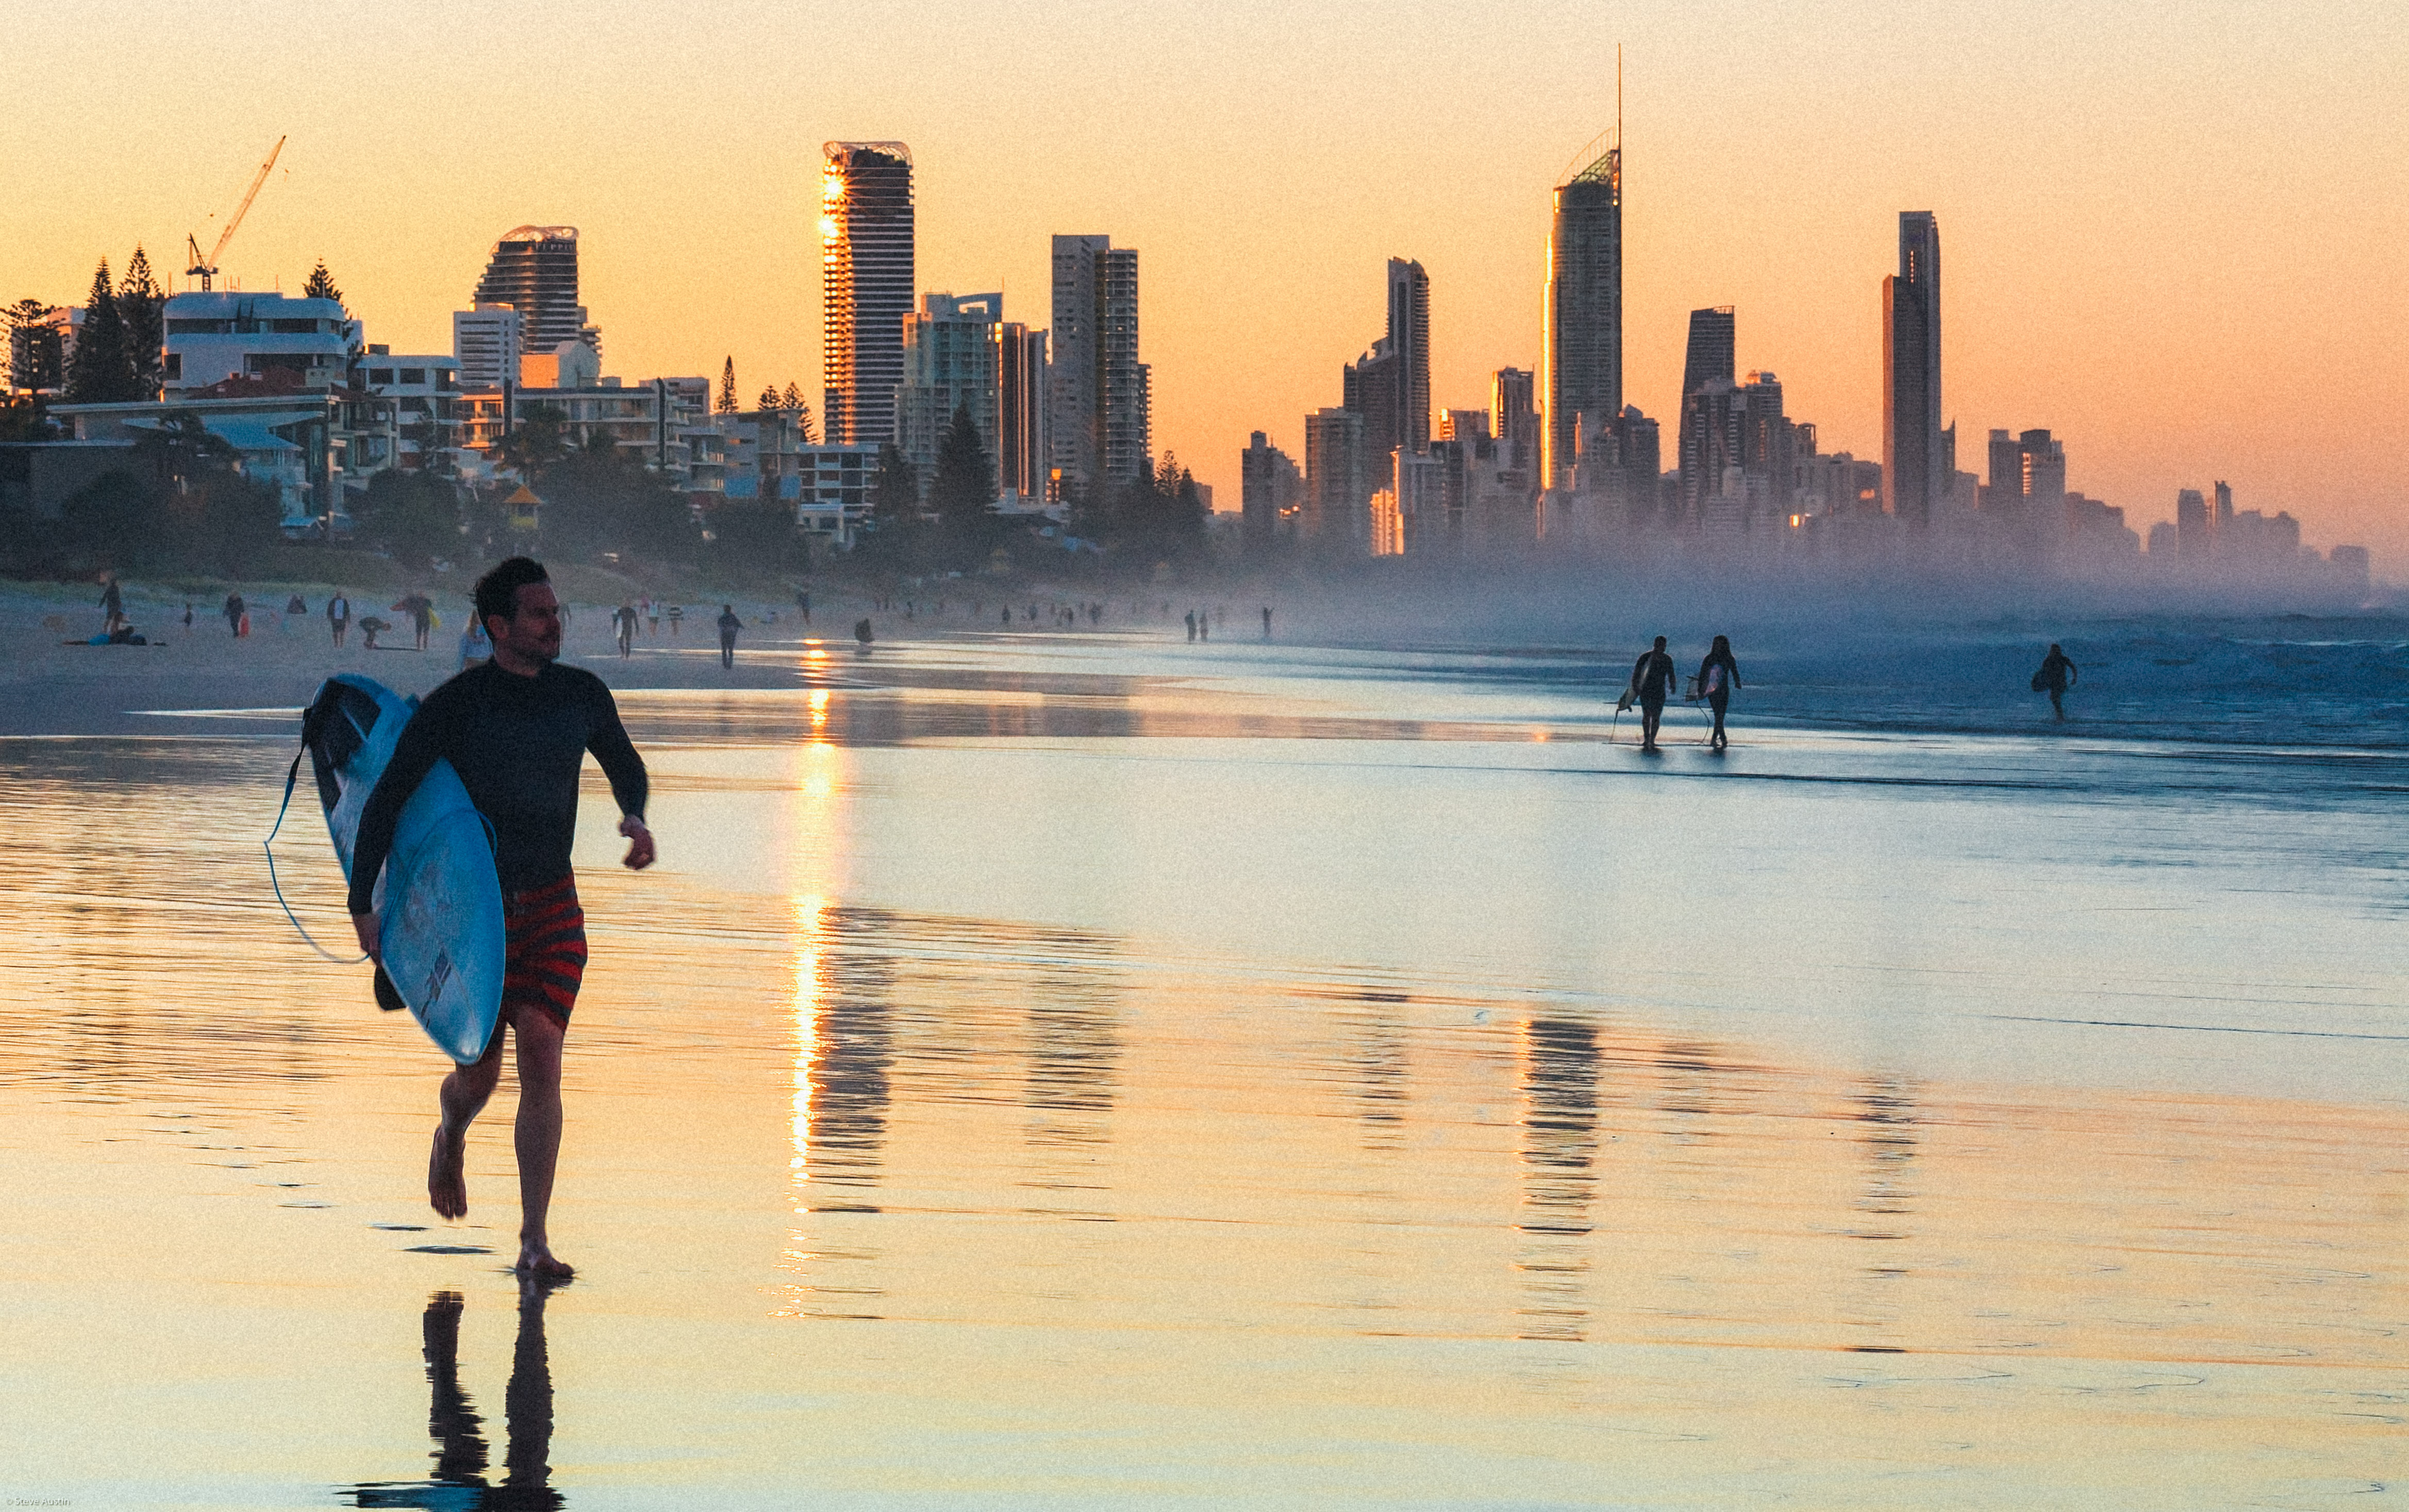 Surfers Paradise - Reasons to Visit